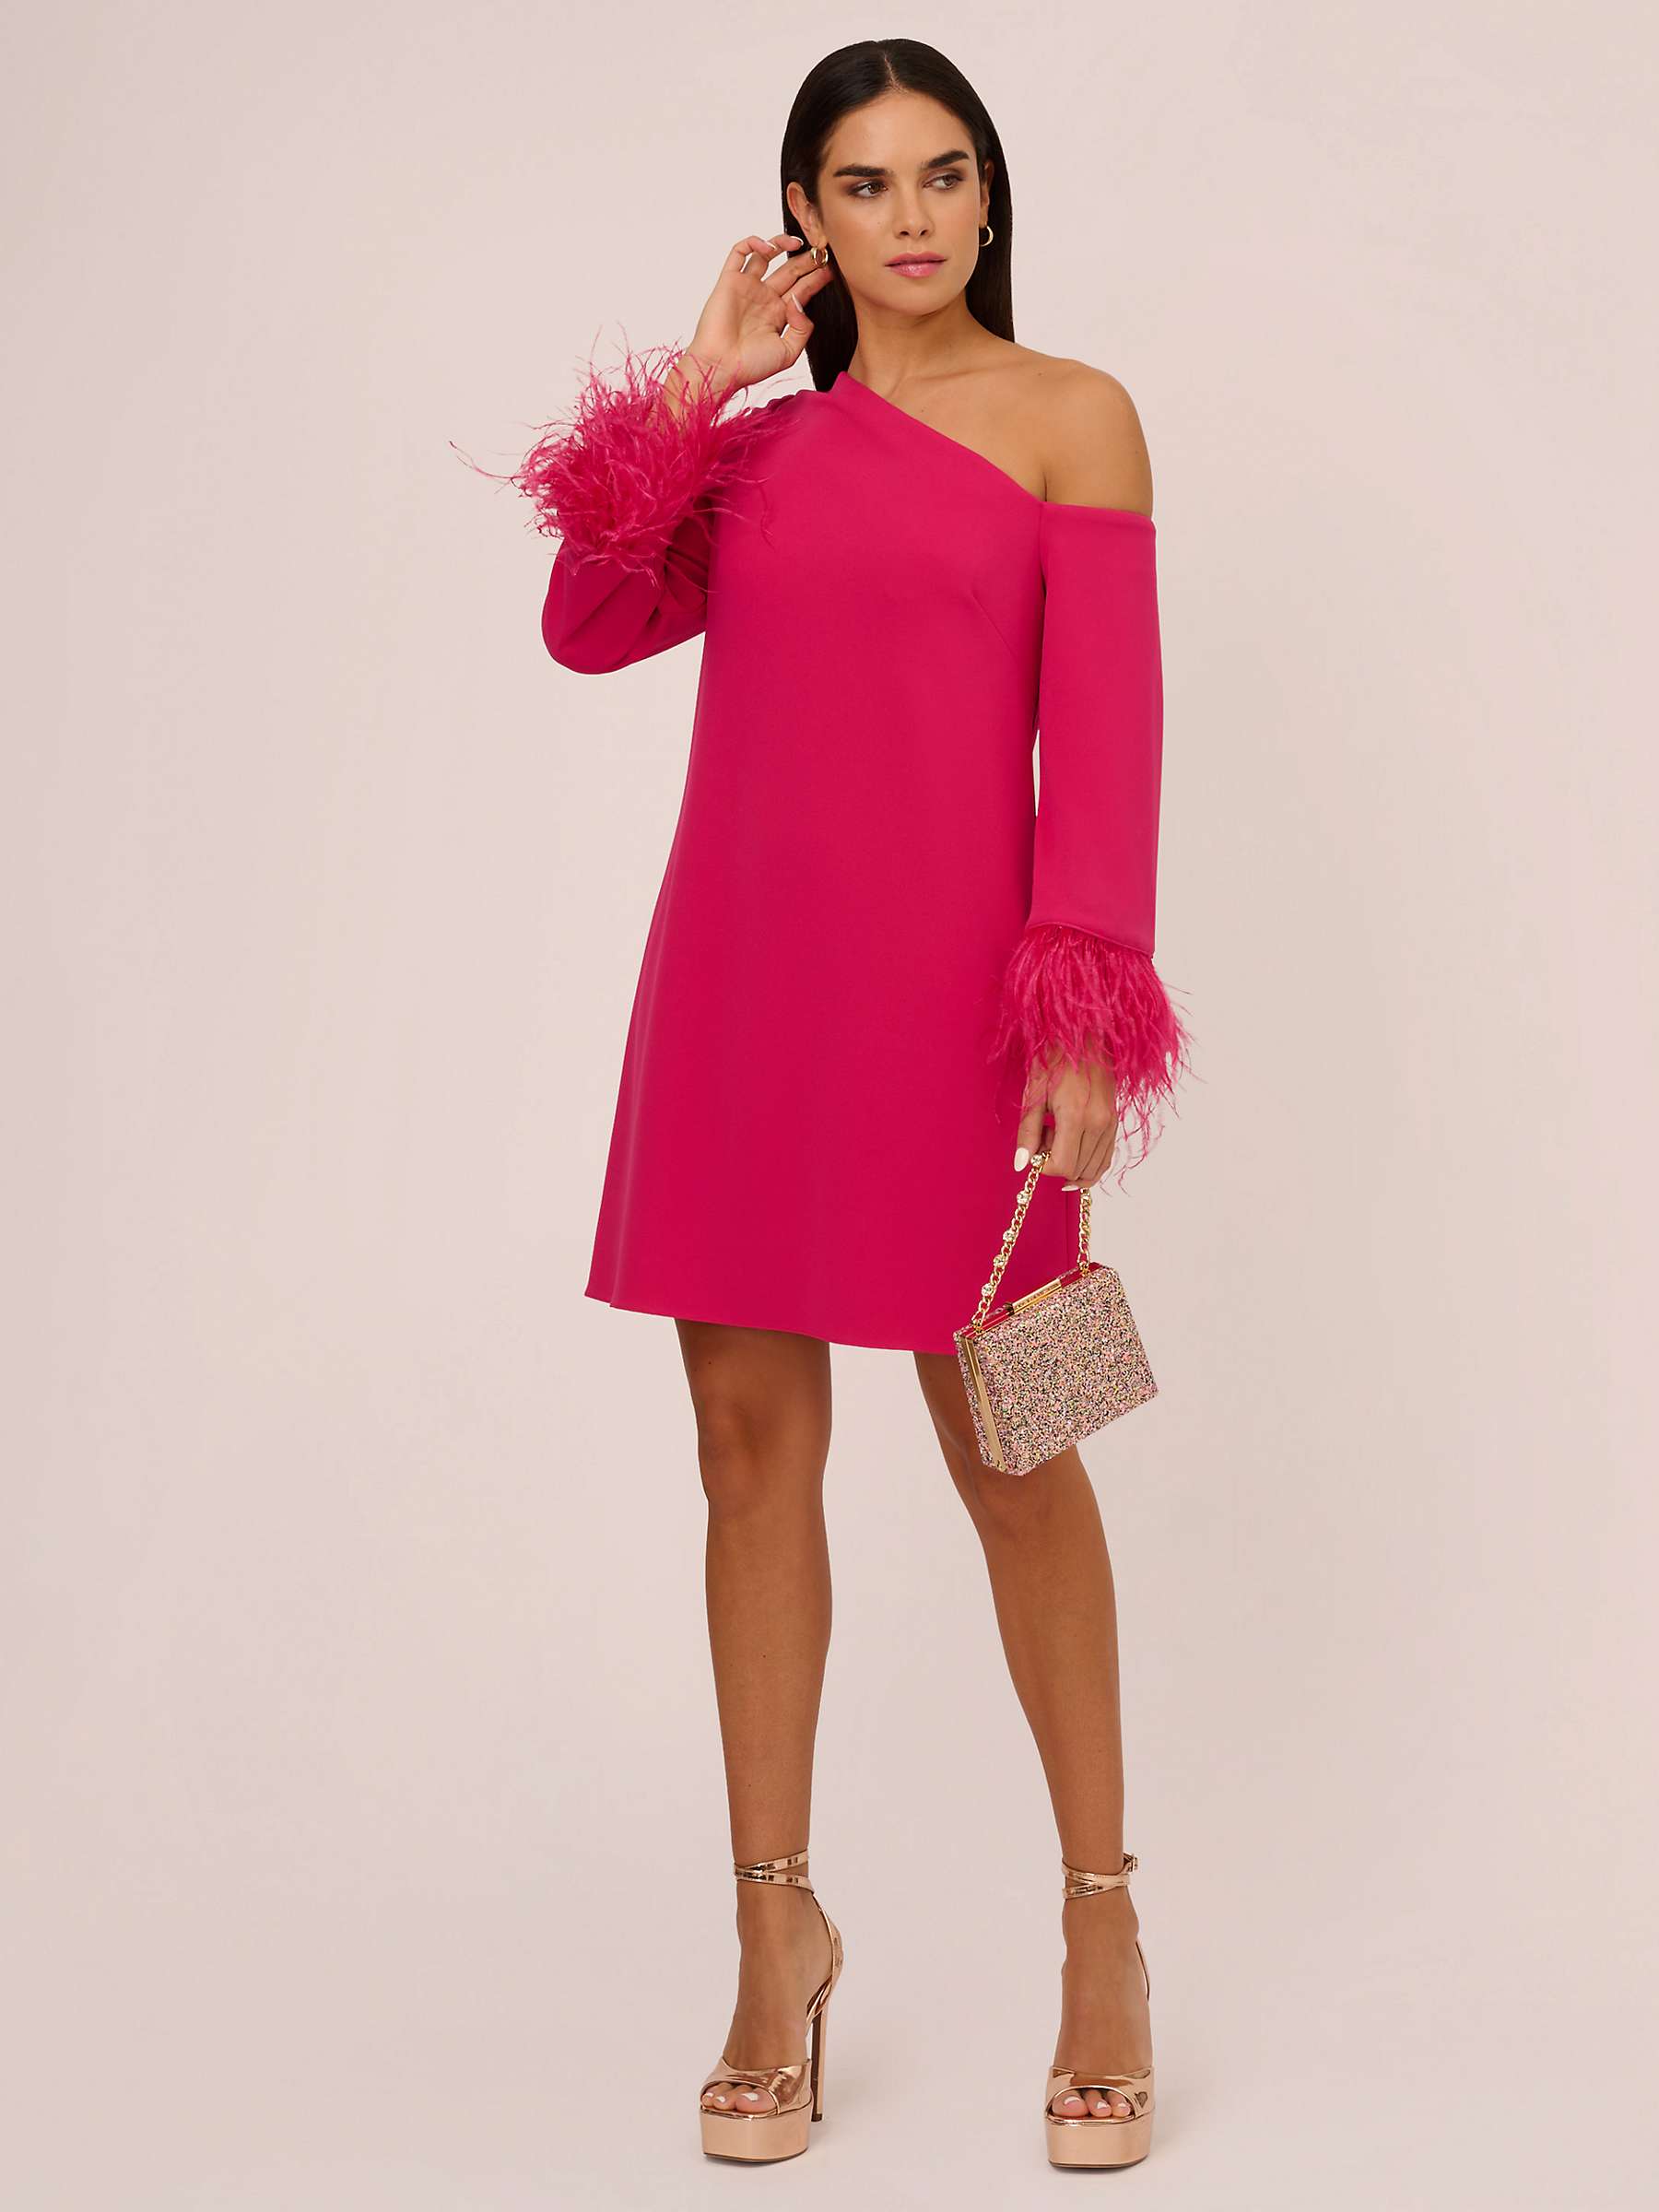 Buy Adrianna Papell Aidan by Adrianna Papell Knit Crepe Cocktail Dress Online at johnlewis.com